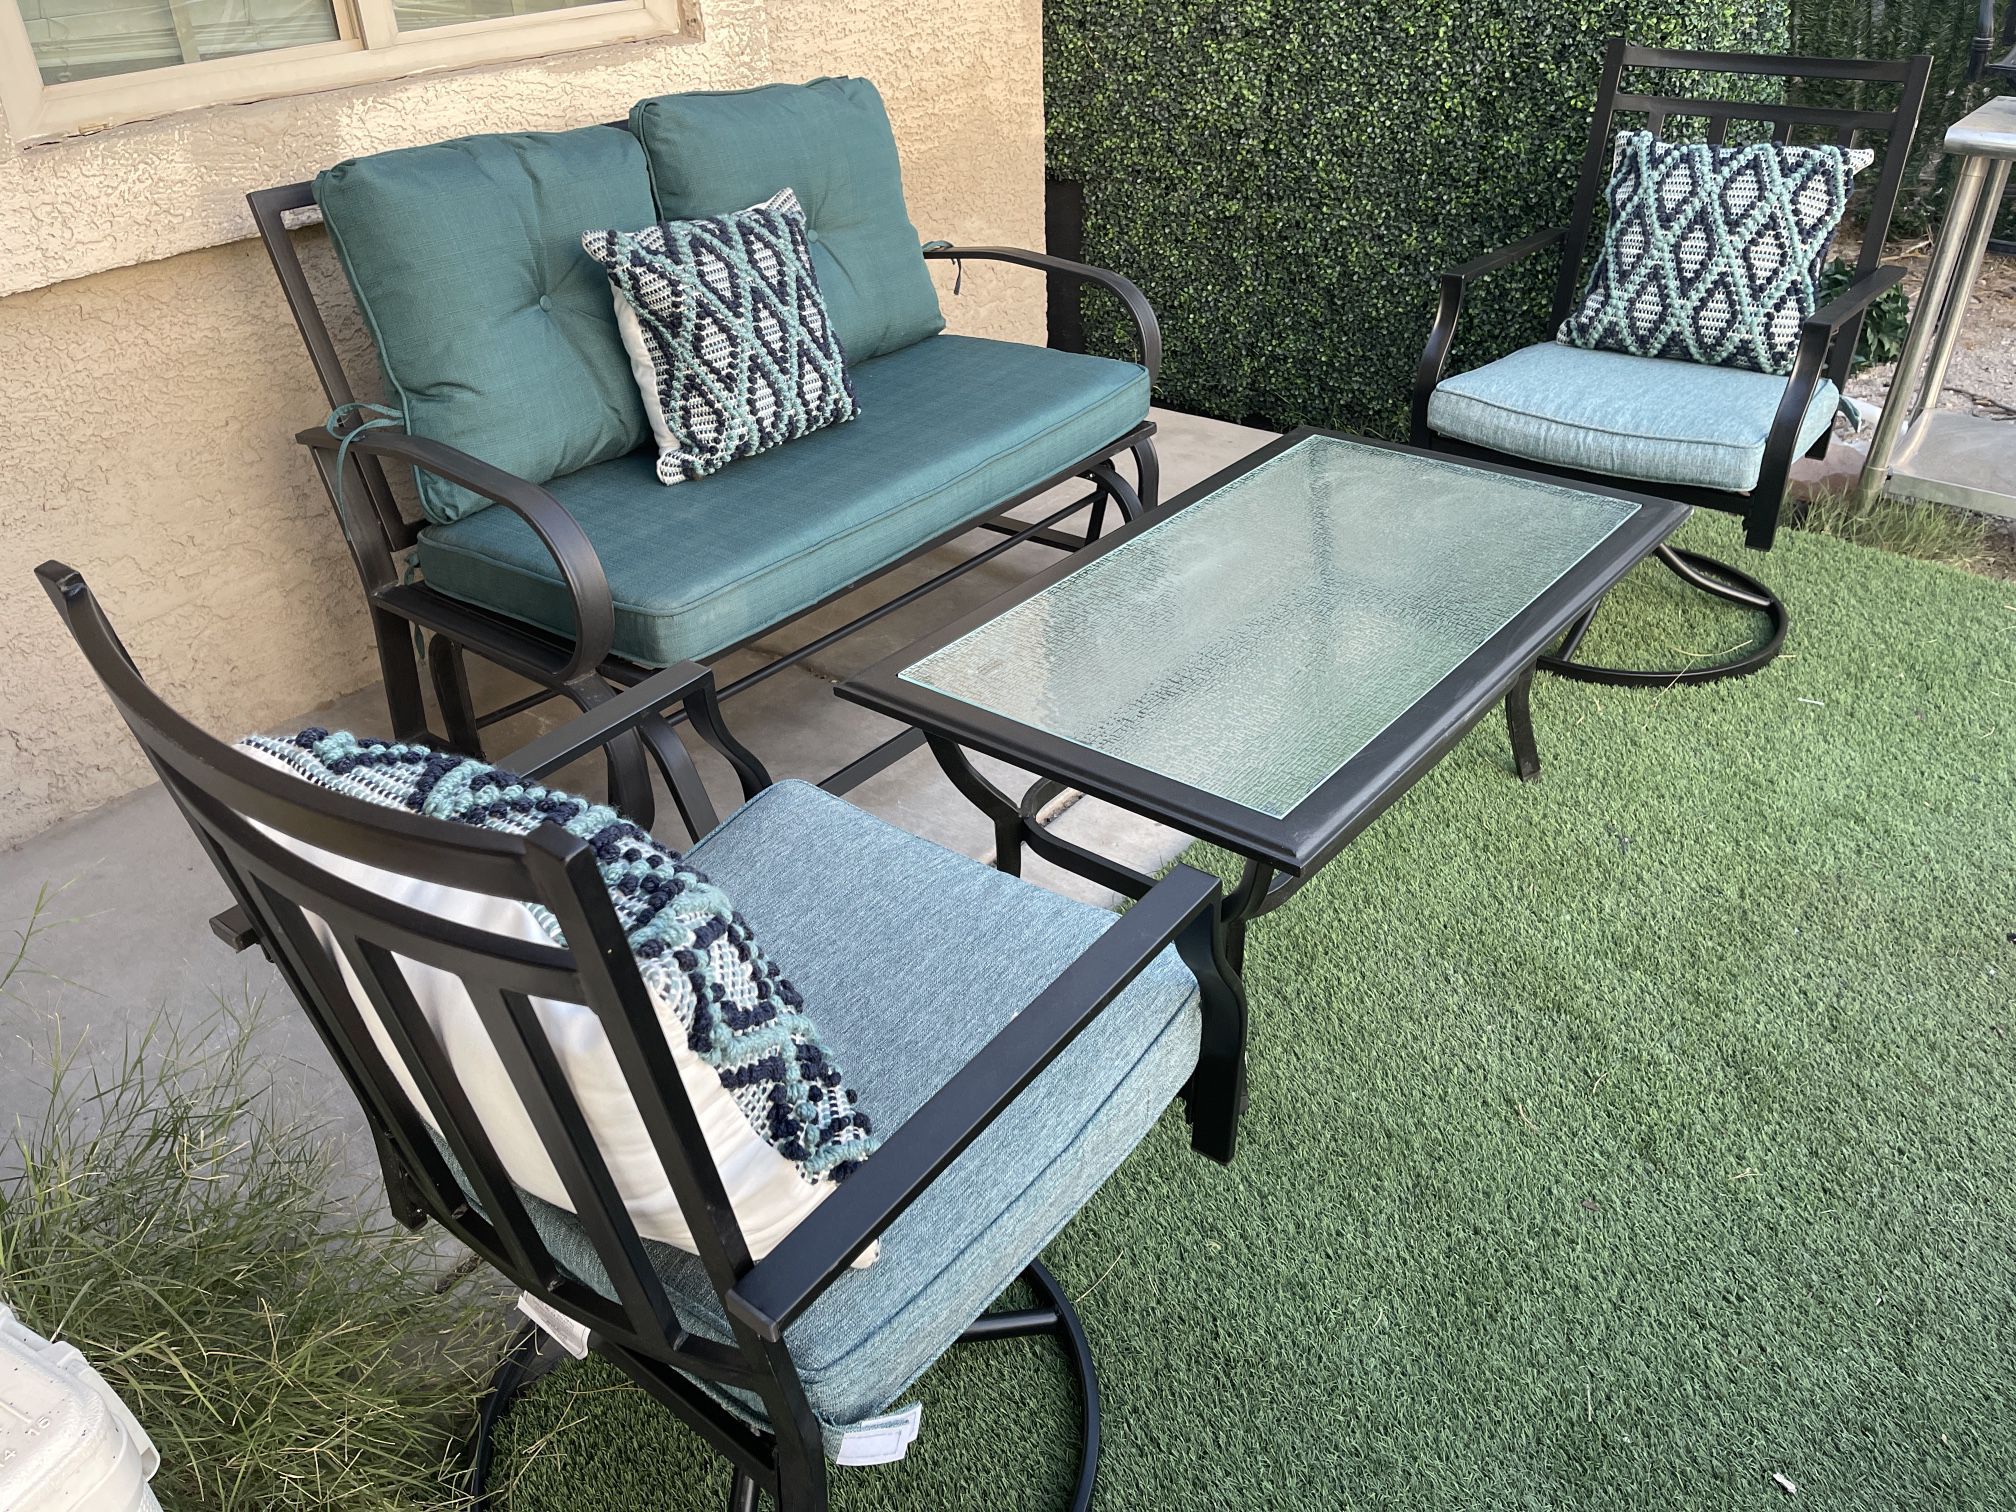 Patio Set, Outdoor Furniture,1 Love Seat Swivel,2 Rocking And Swivel Chairs With Cushions And Coffe Table.